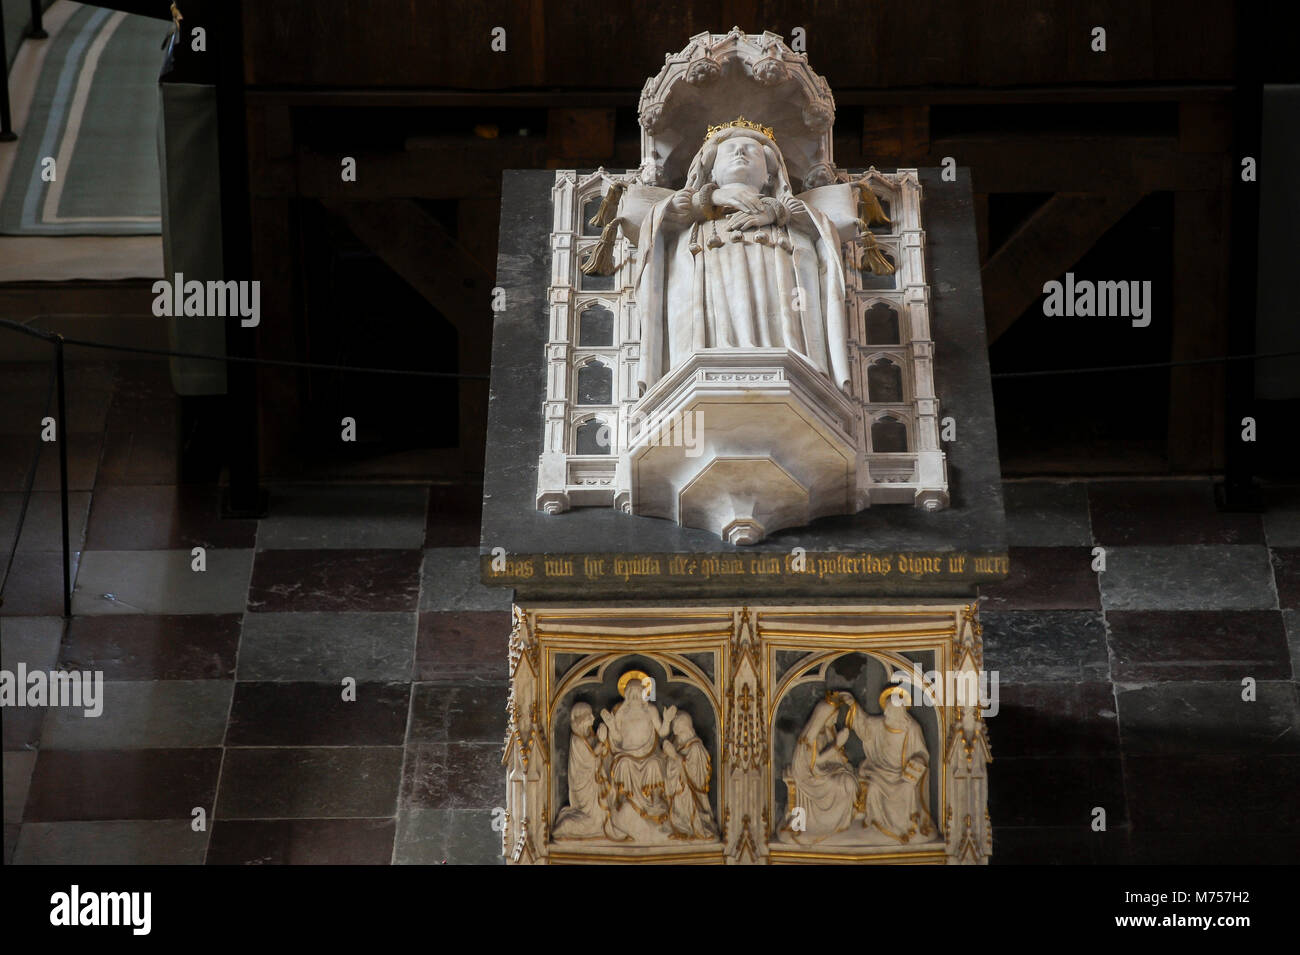 Sarcophagus of Queen Margrethe I, the founder and first ruler of kingdoms of Denmark, Sweden and Norway after personal union called Kalmar Union, behi Stock Photo